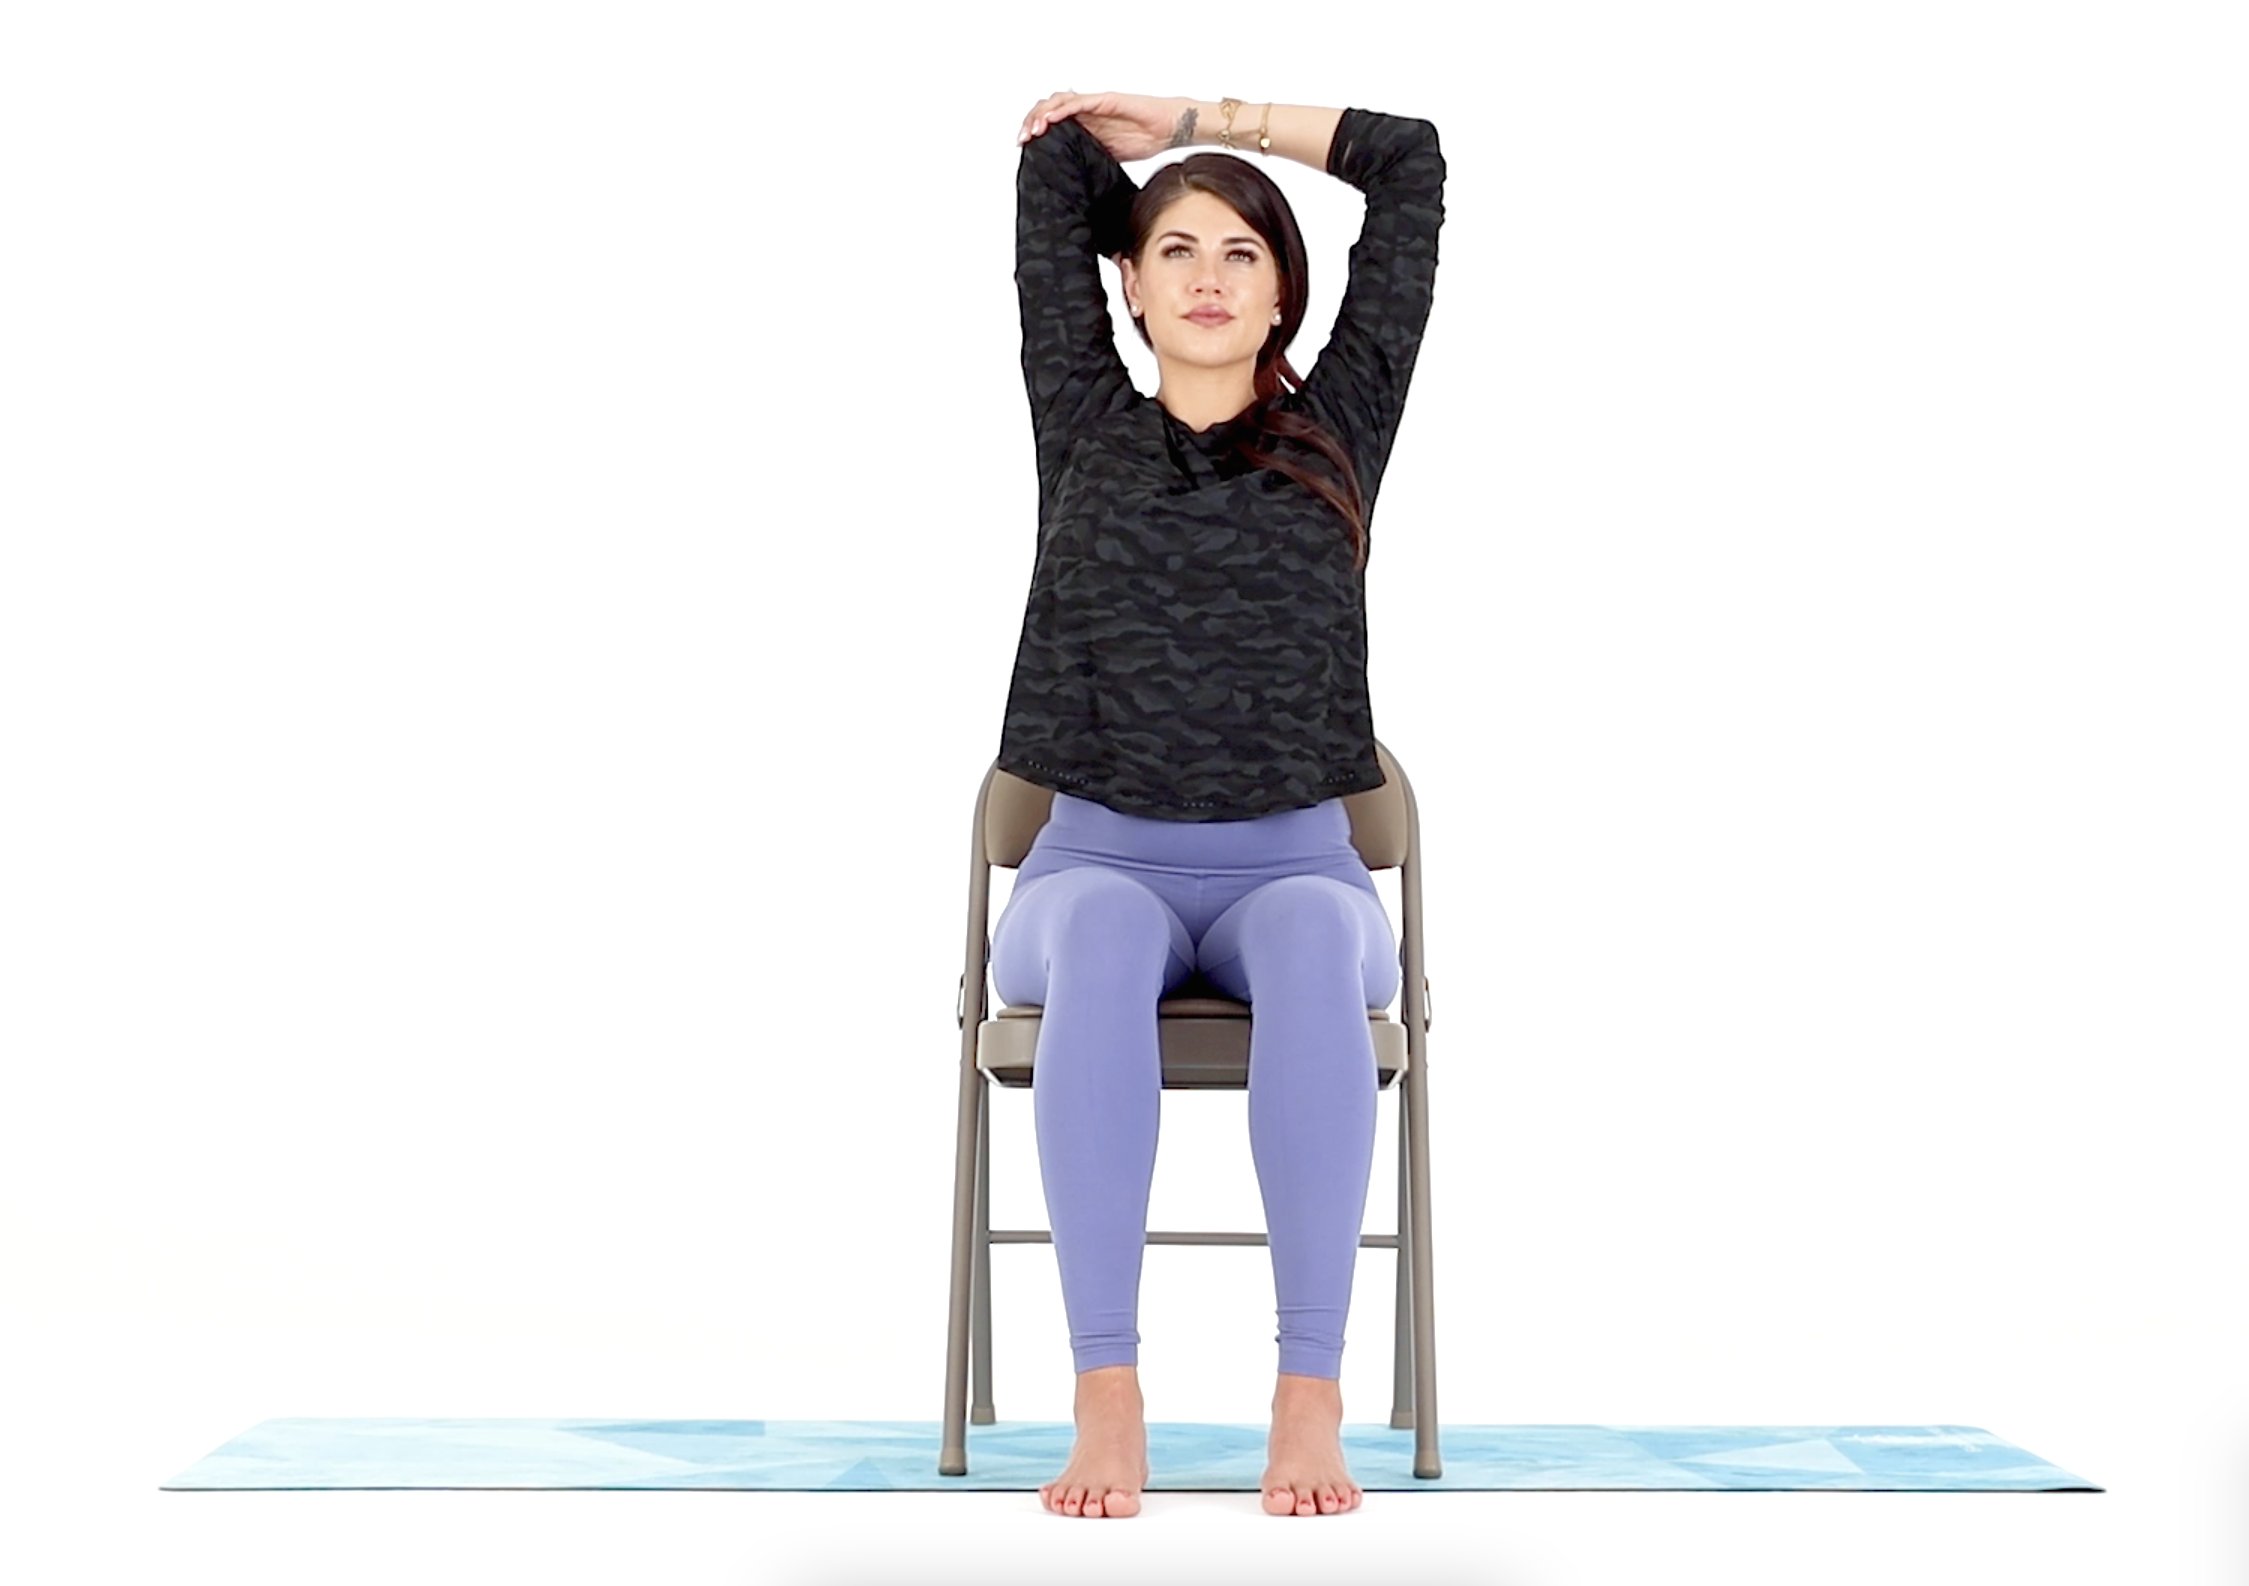 Episode 5: Seated Pilates - Chair exercises for CKD patients - YouTube